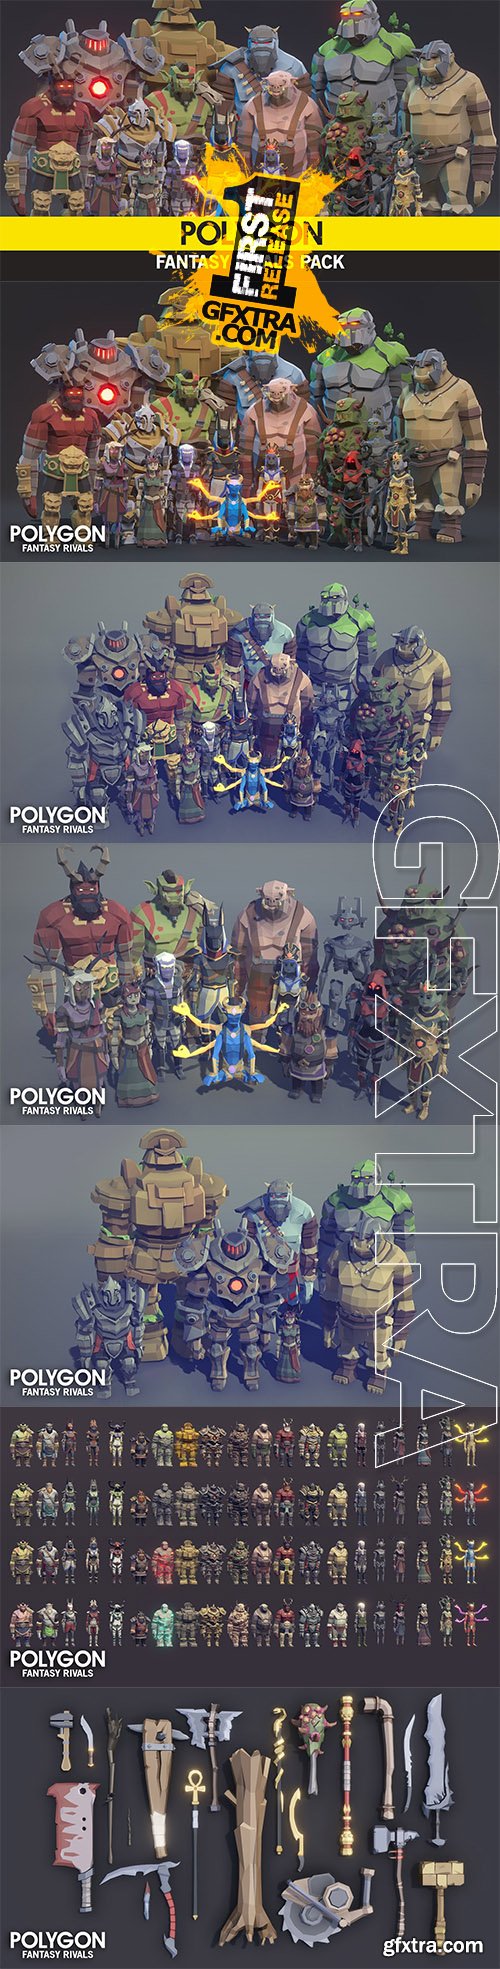 Cgtrader - POLYGON - Fantasy Rivals Pack Low-poly 3D model